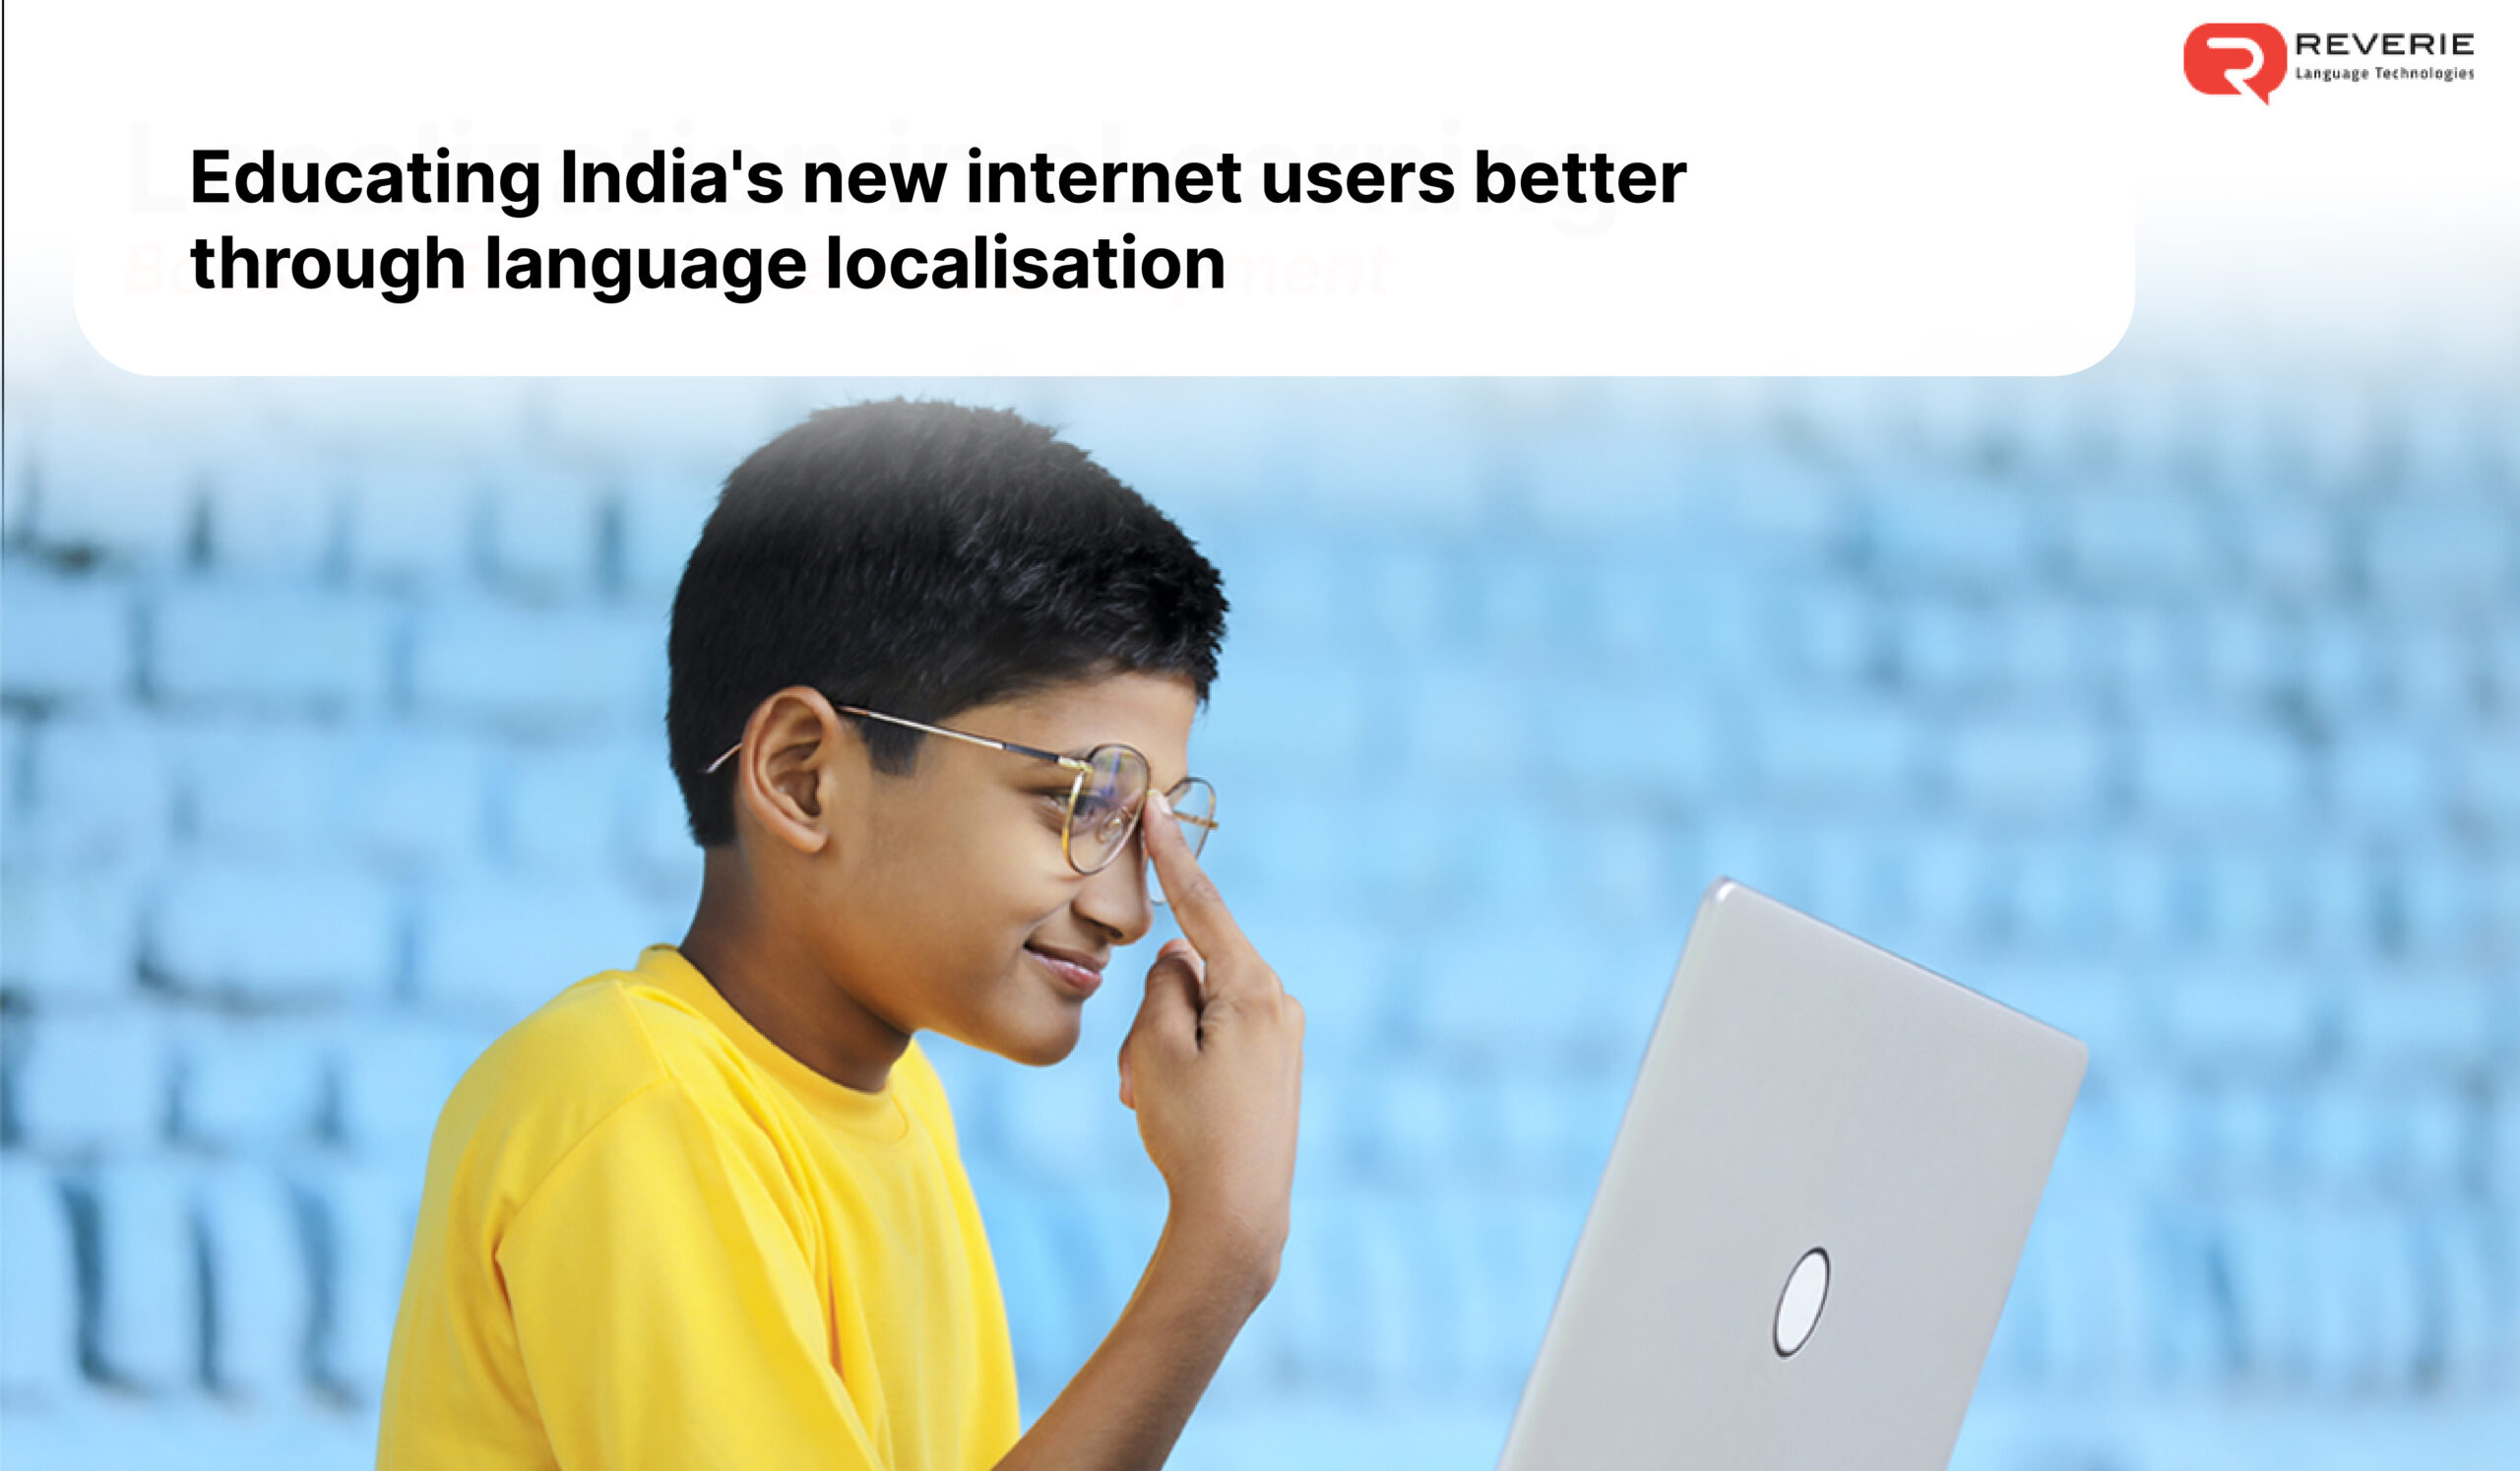 Educating India's new internet users better through language localisation